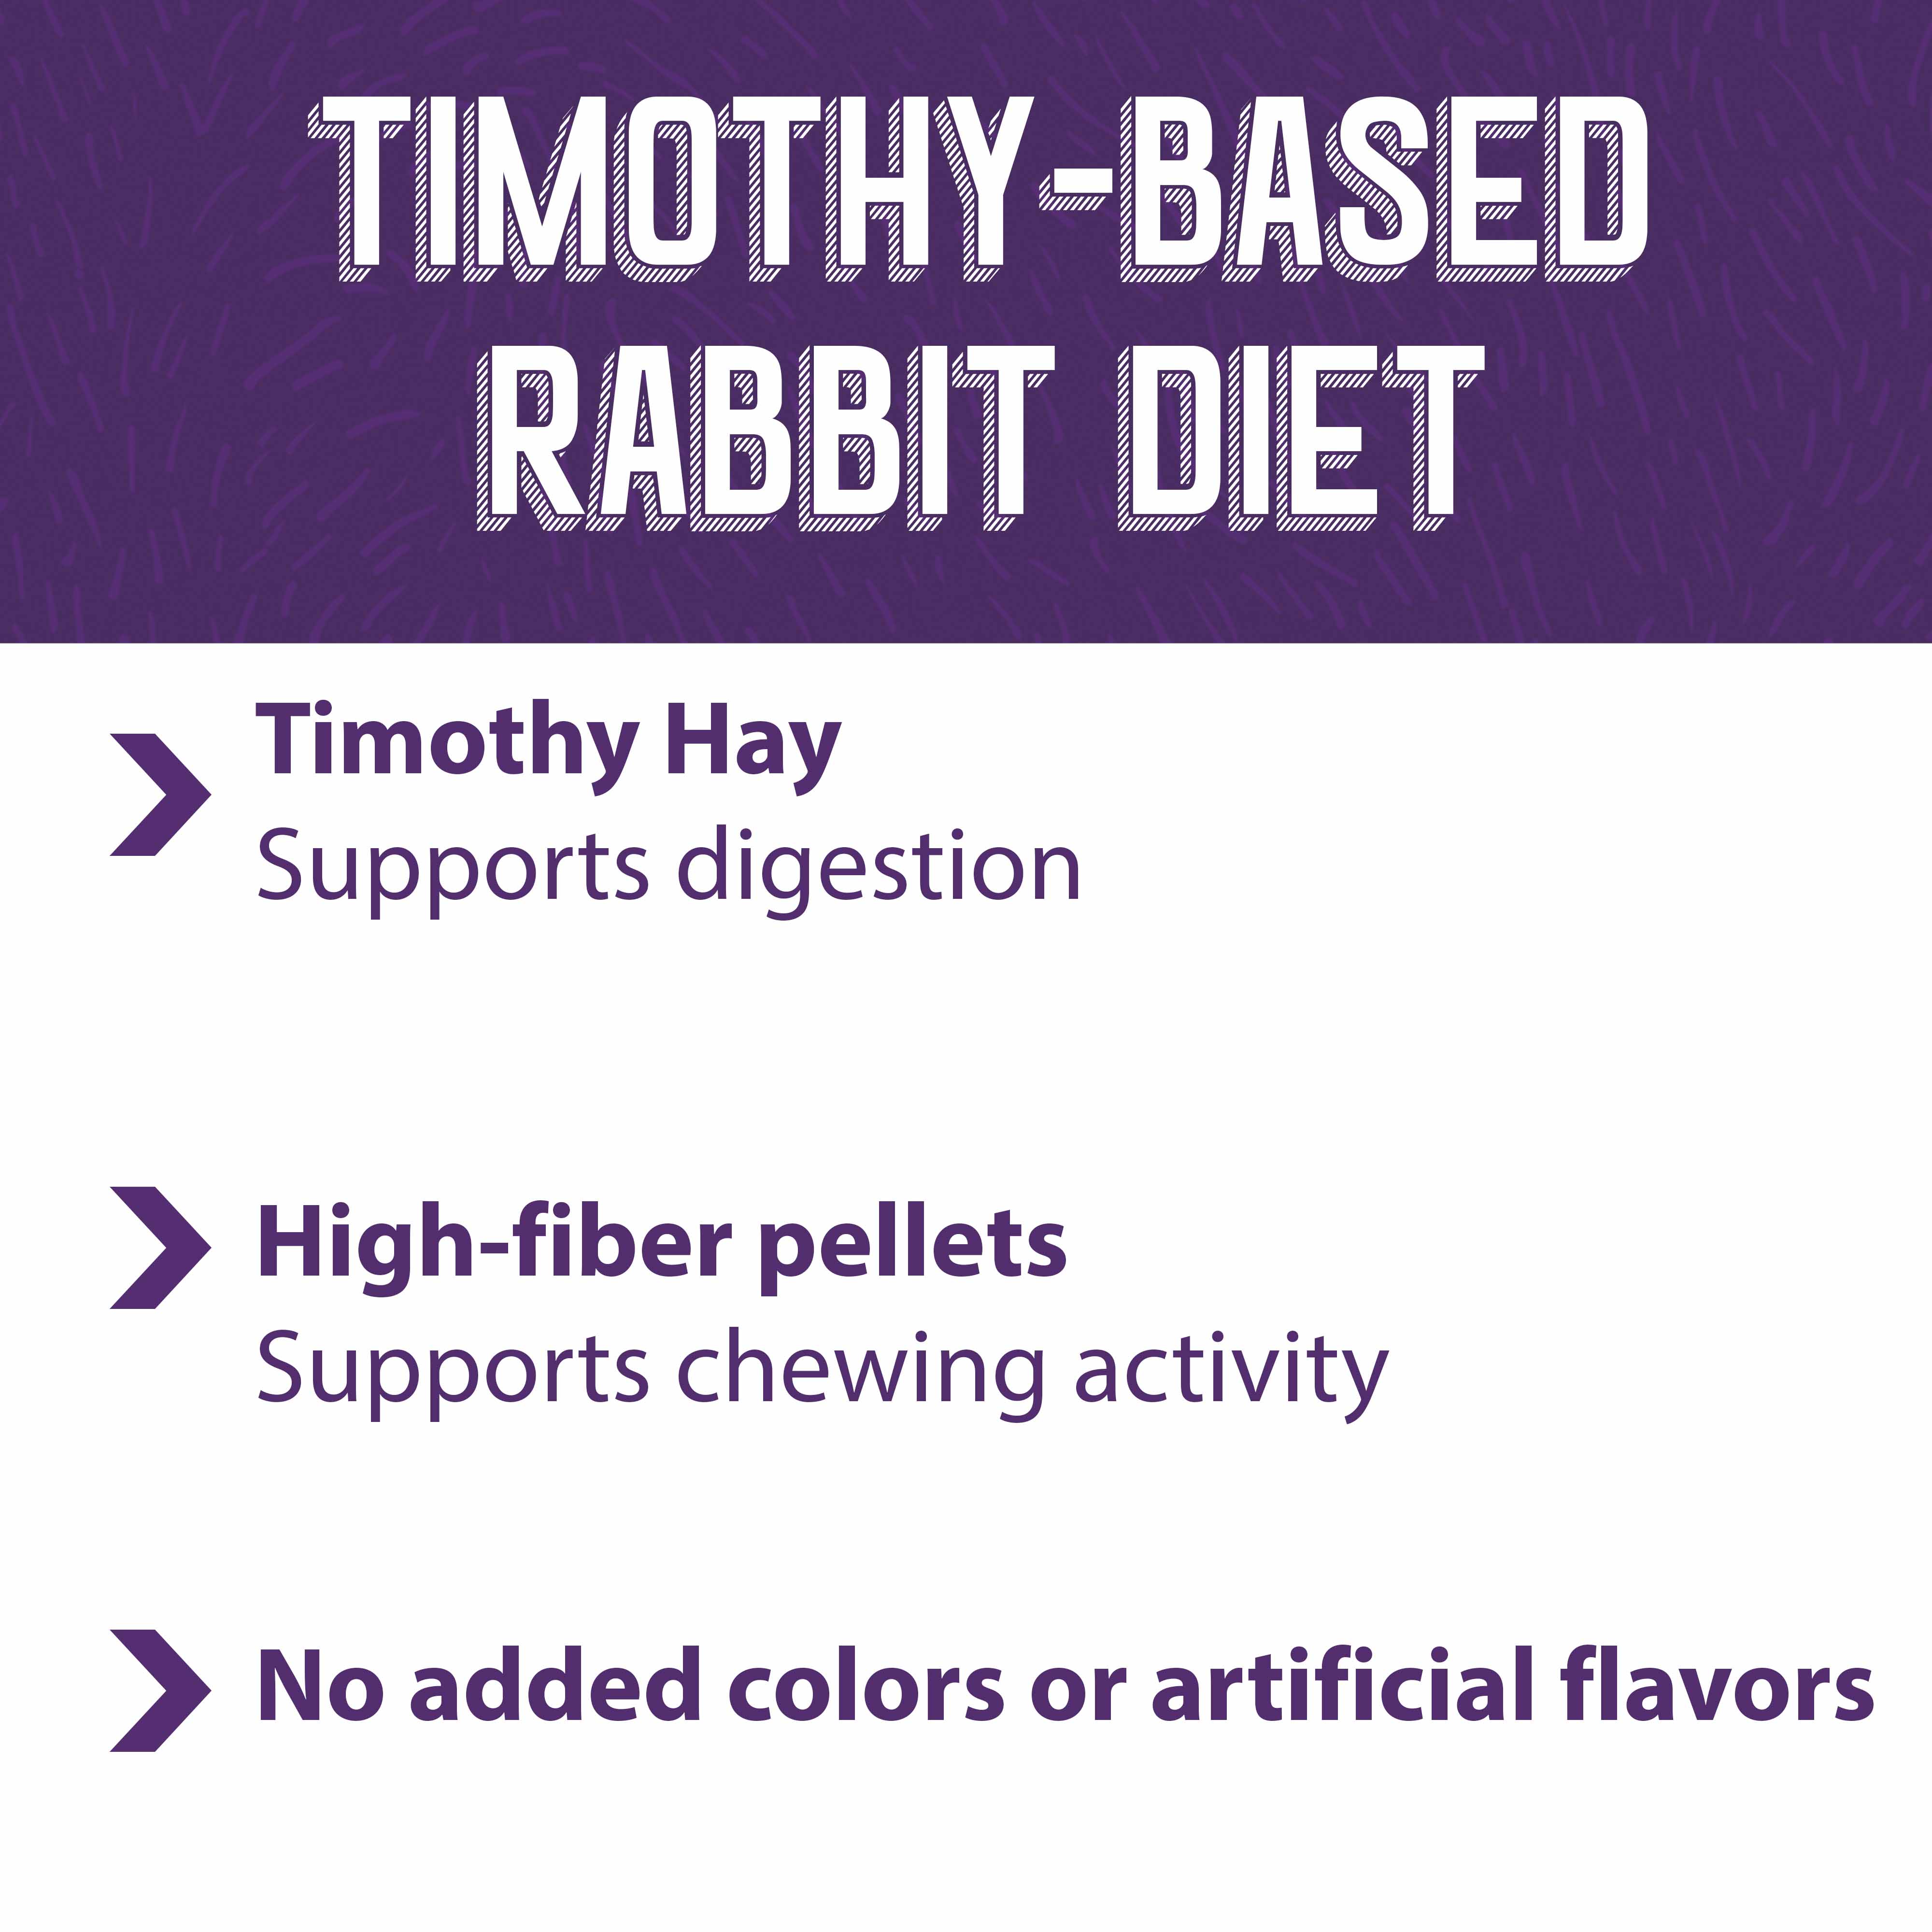 Rabbit Diet contains timothy hay to support digestion